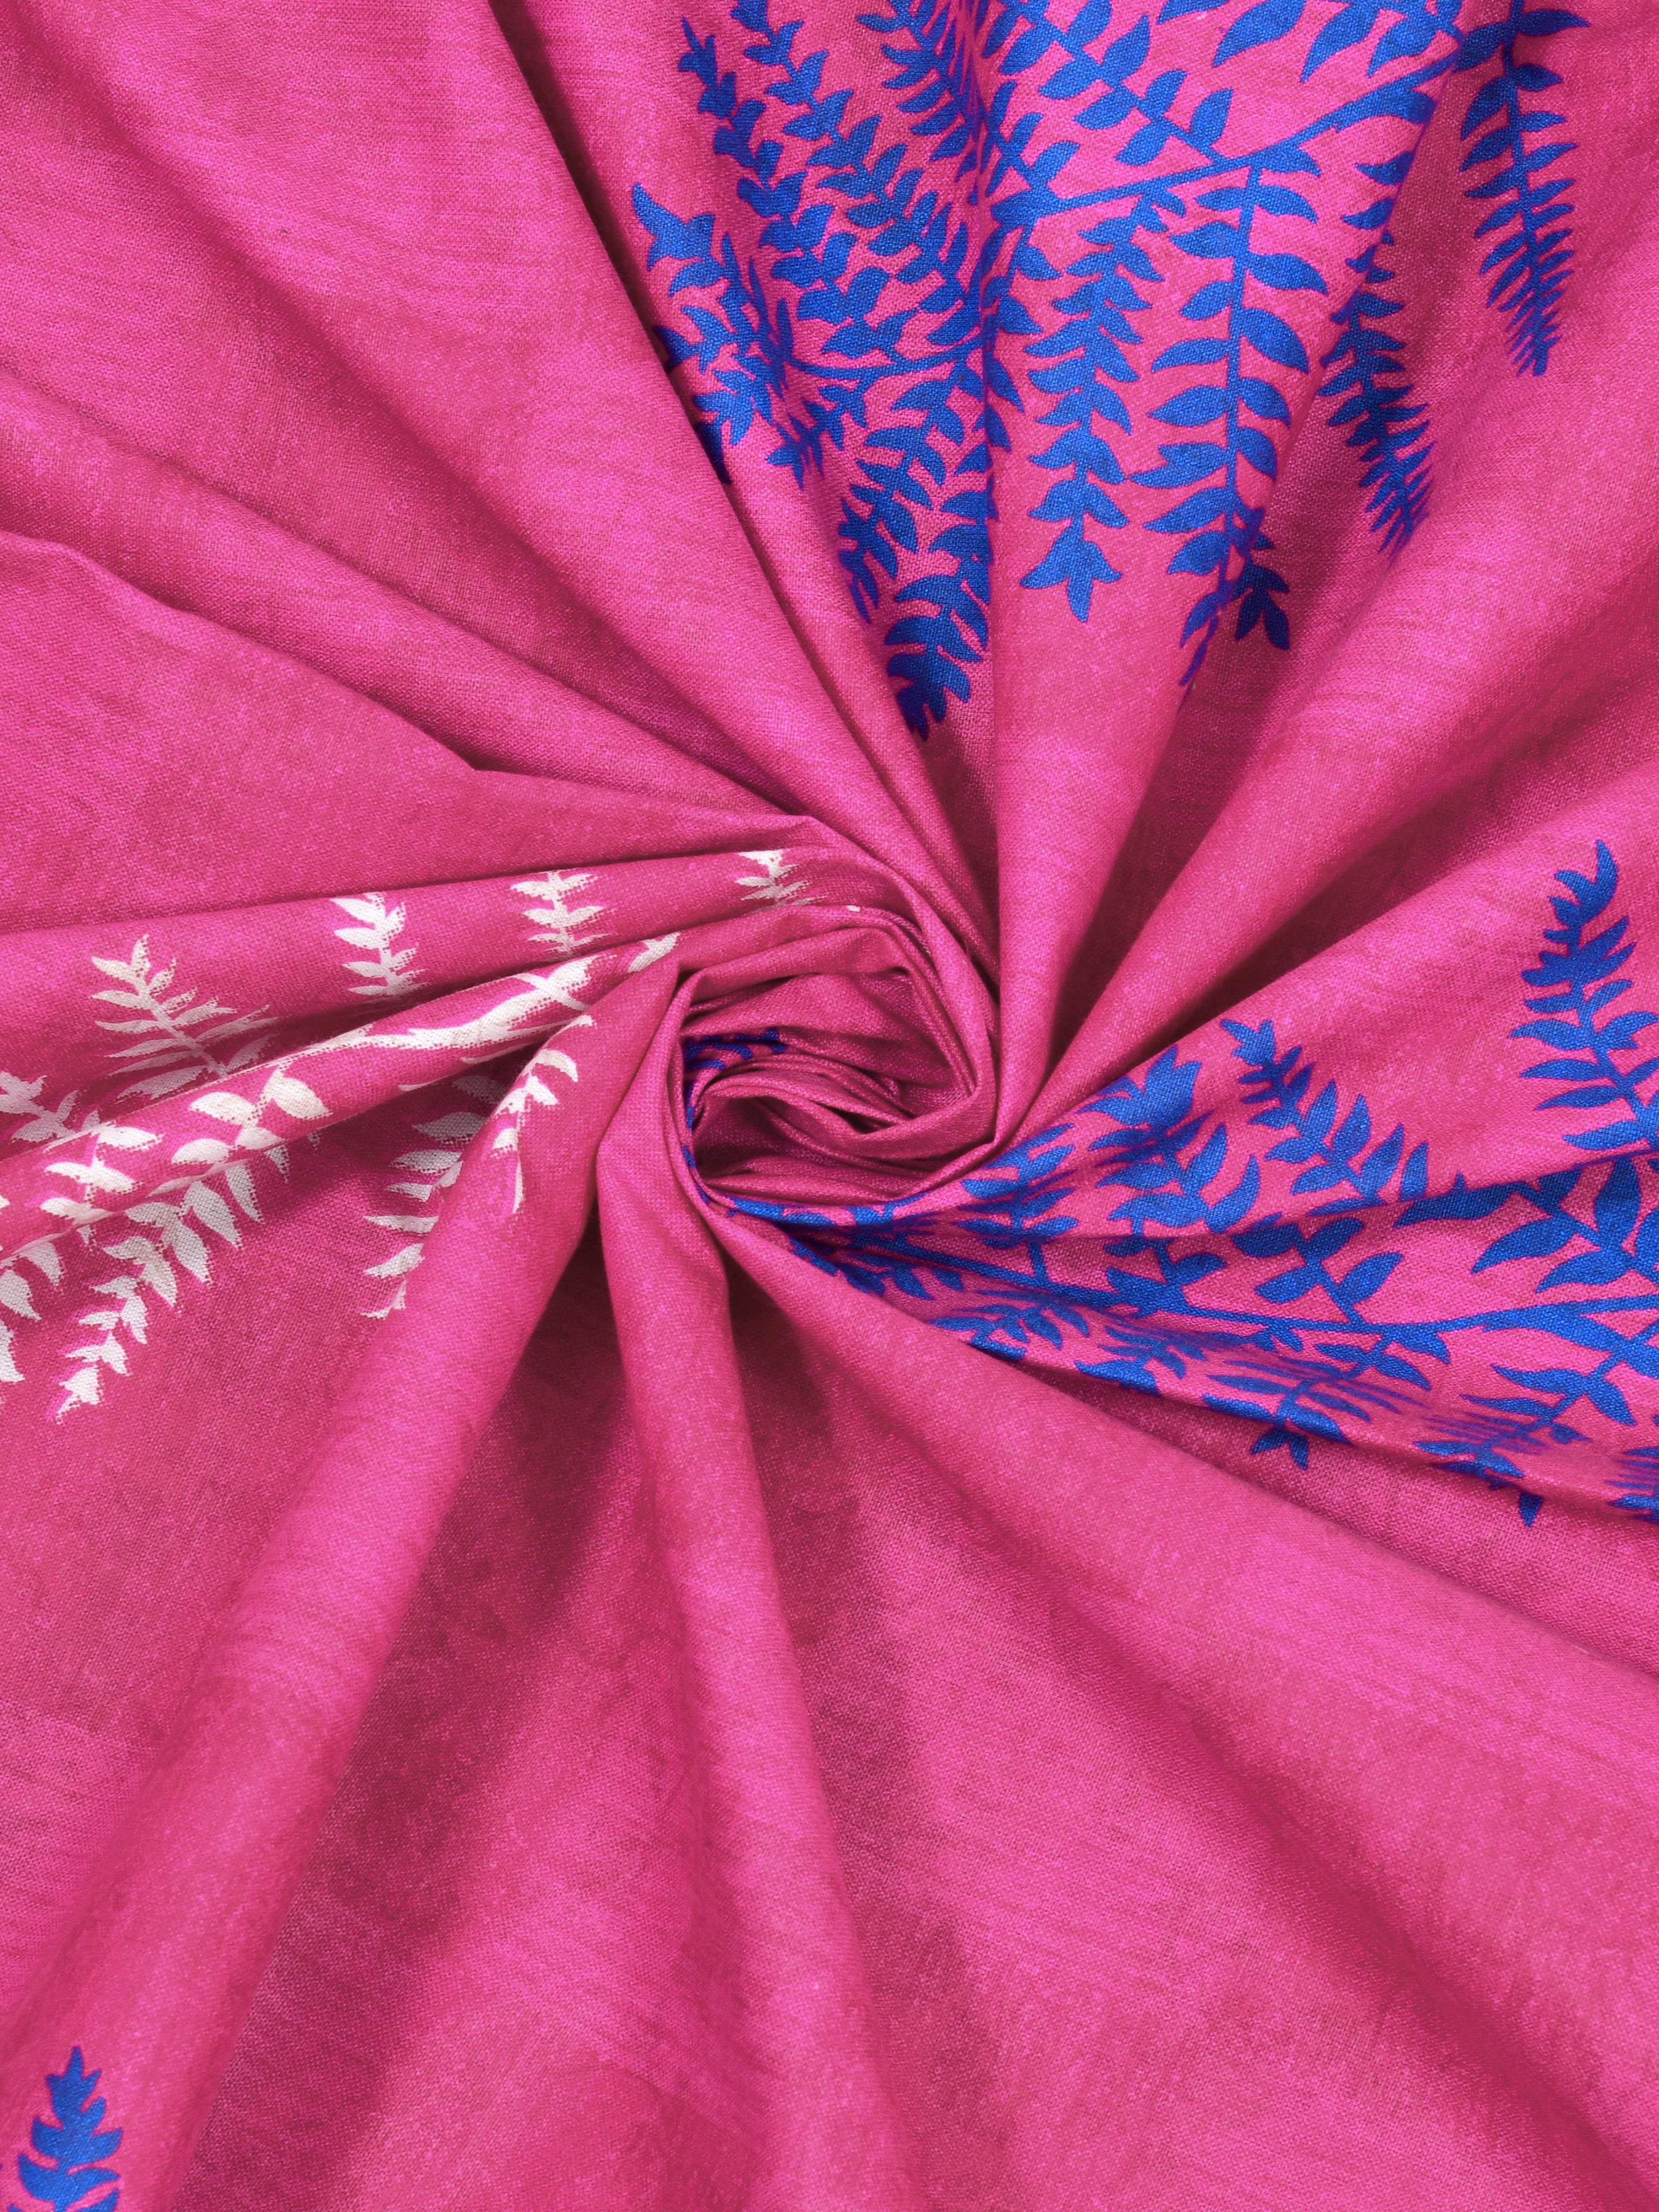 Pink and Blue Ethnic Motifs Super King Size Cotton Bedsheet